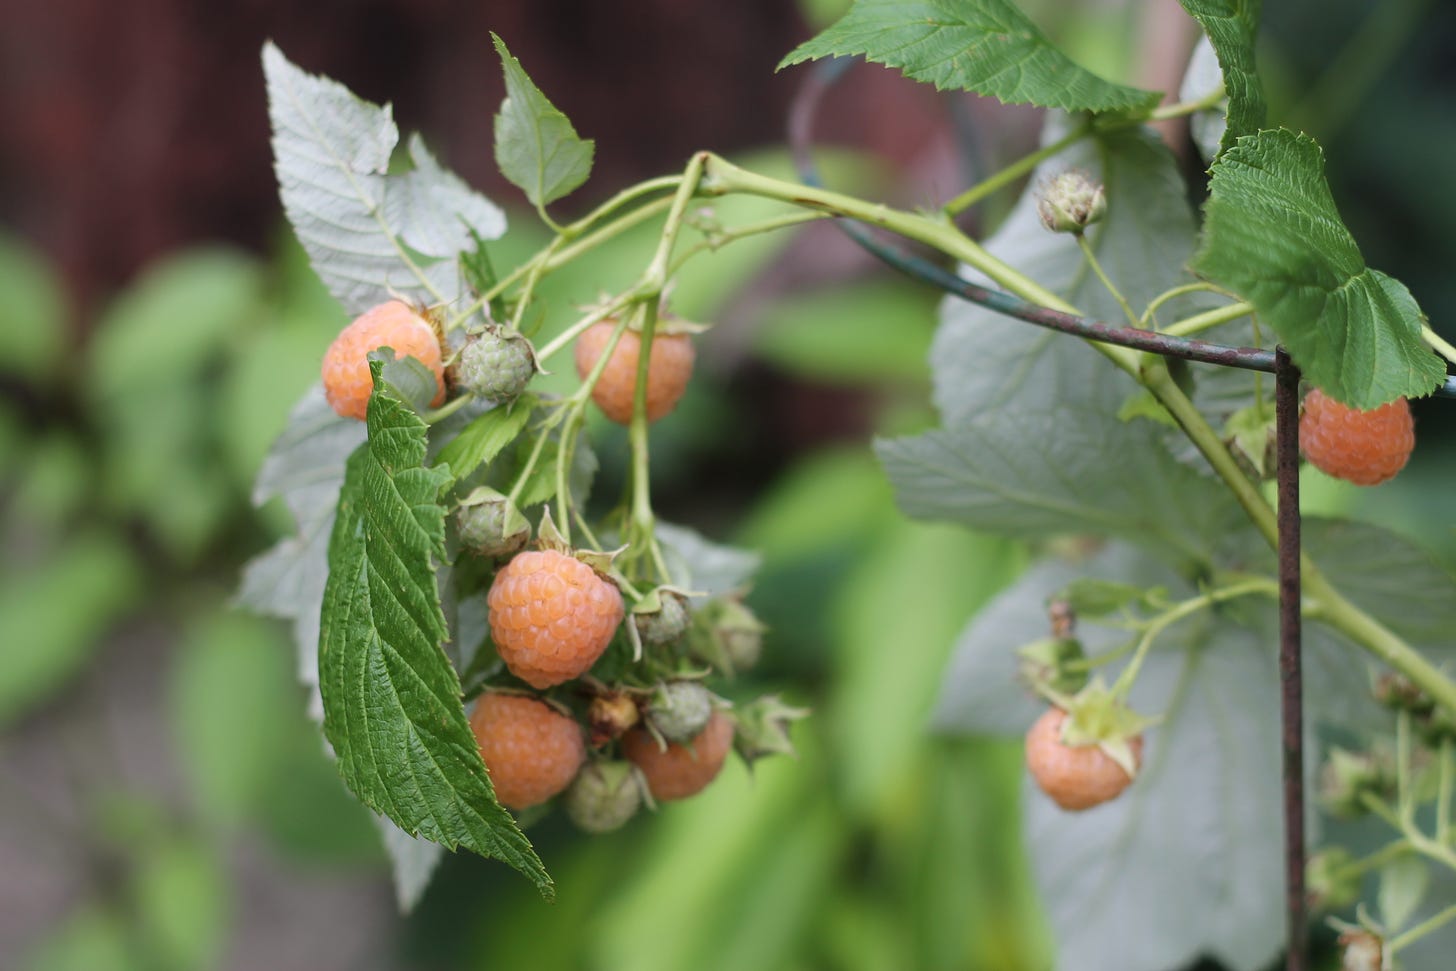 Closeup of peach coloured raspberries growing on the plant. Some raspberries are still small and green and not yet ripe. 